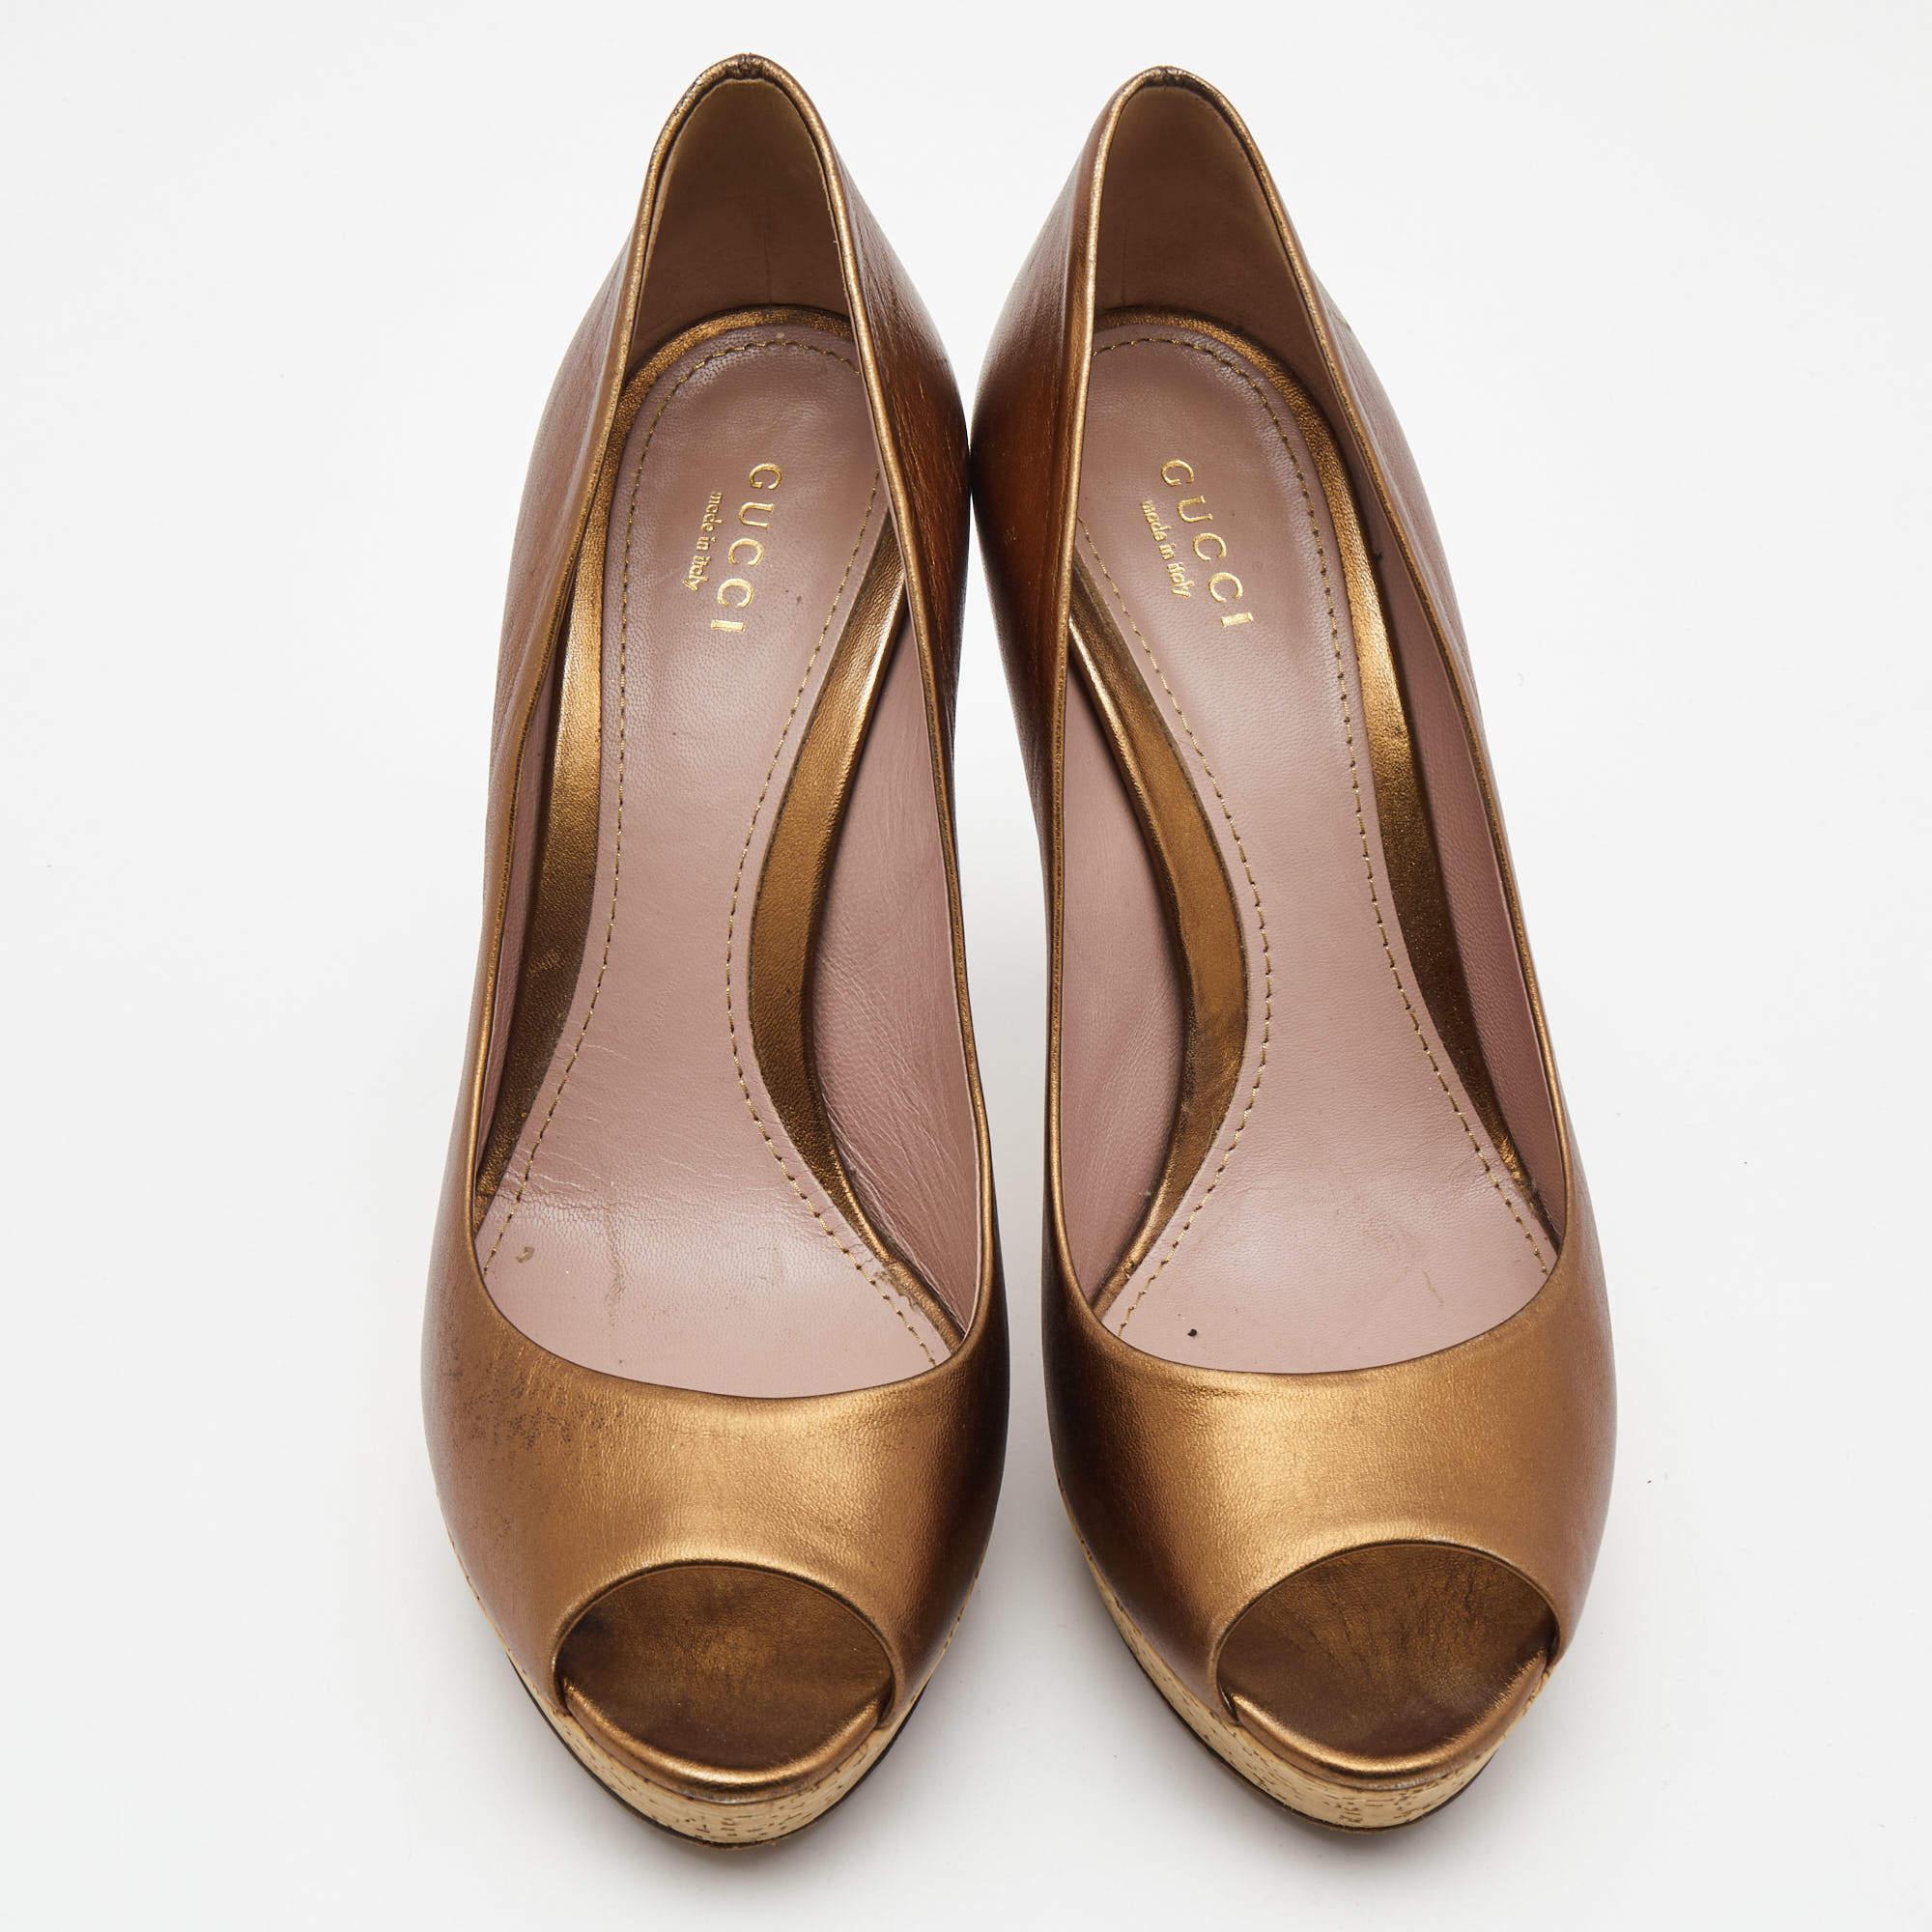 Exhibit an elegant style with this pair of pumps. These elegant shoes are crafted from quality materials. They are set on durable soles and sleek heels.

Includes
Original Dustbag